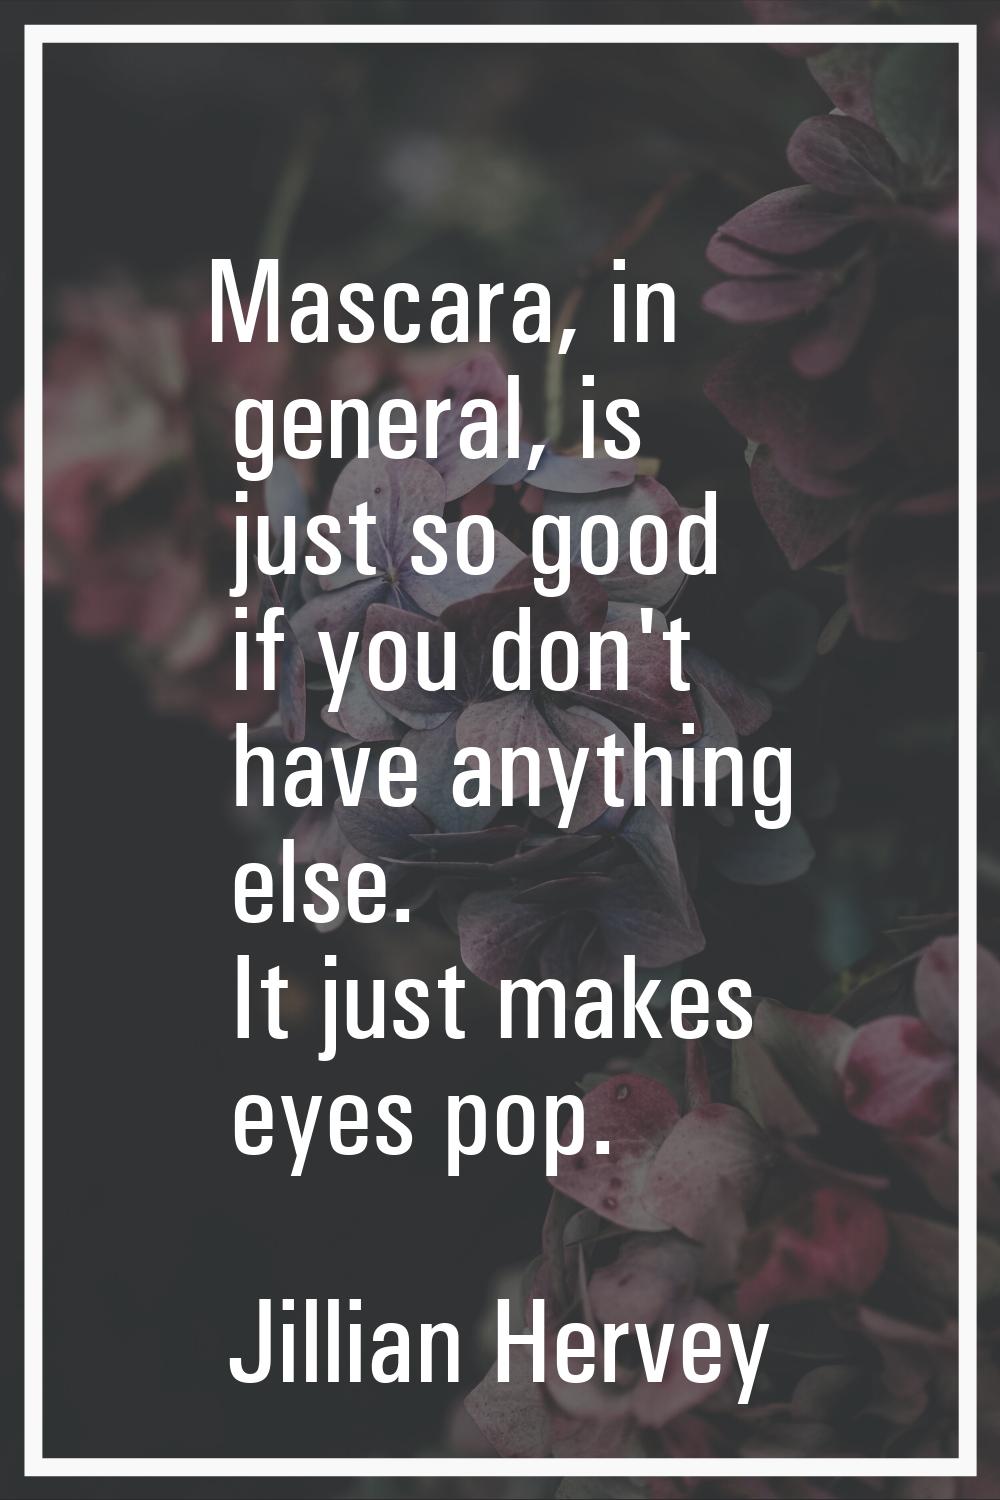 Mascara, in general, is just so good if you don't have anything else. It just makes eyes pop.